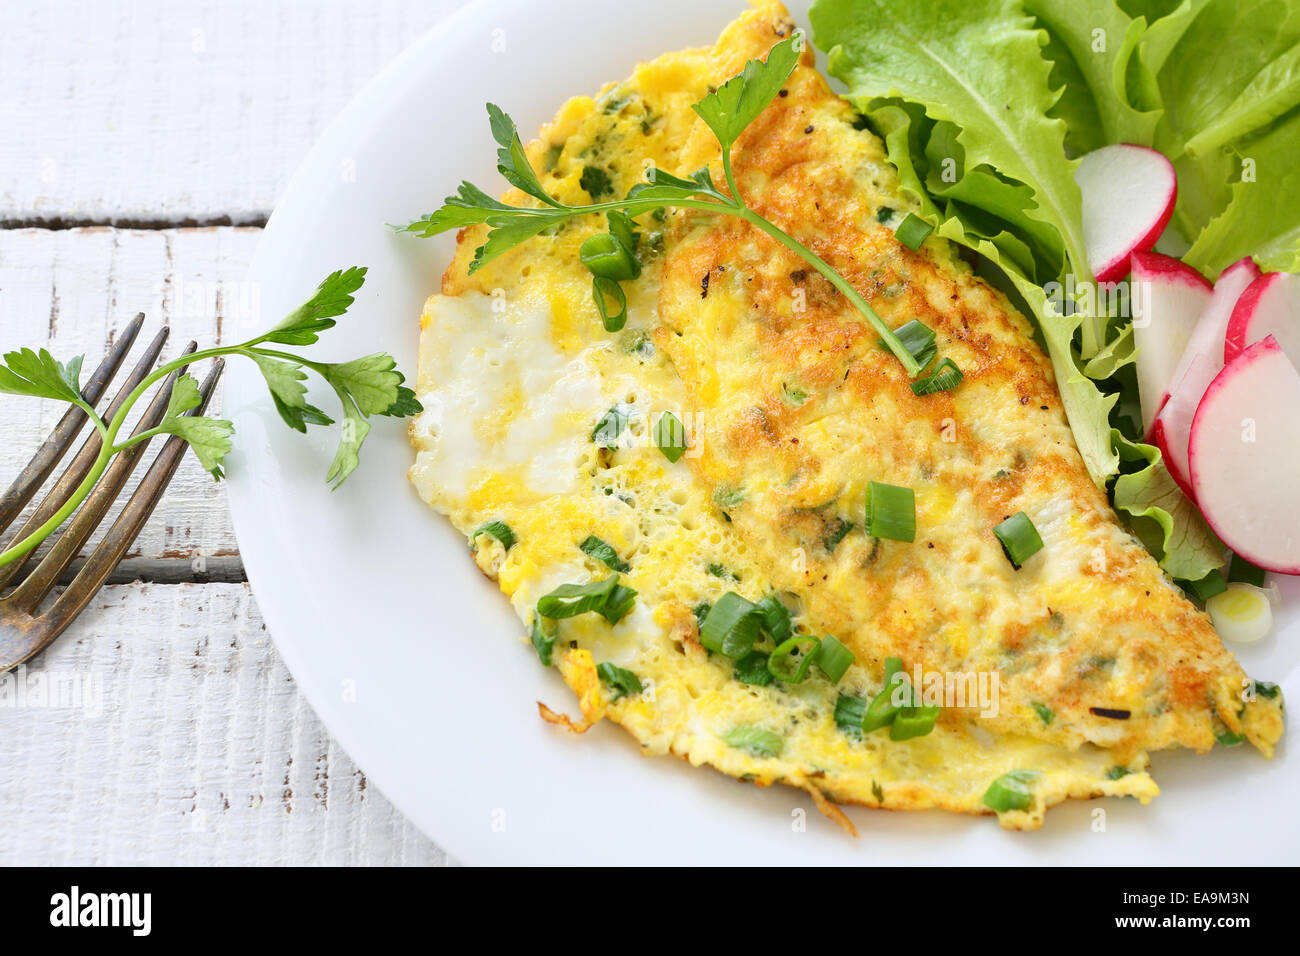 Omelette with radishes, onions and lettuce, food Stock Photo